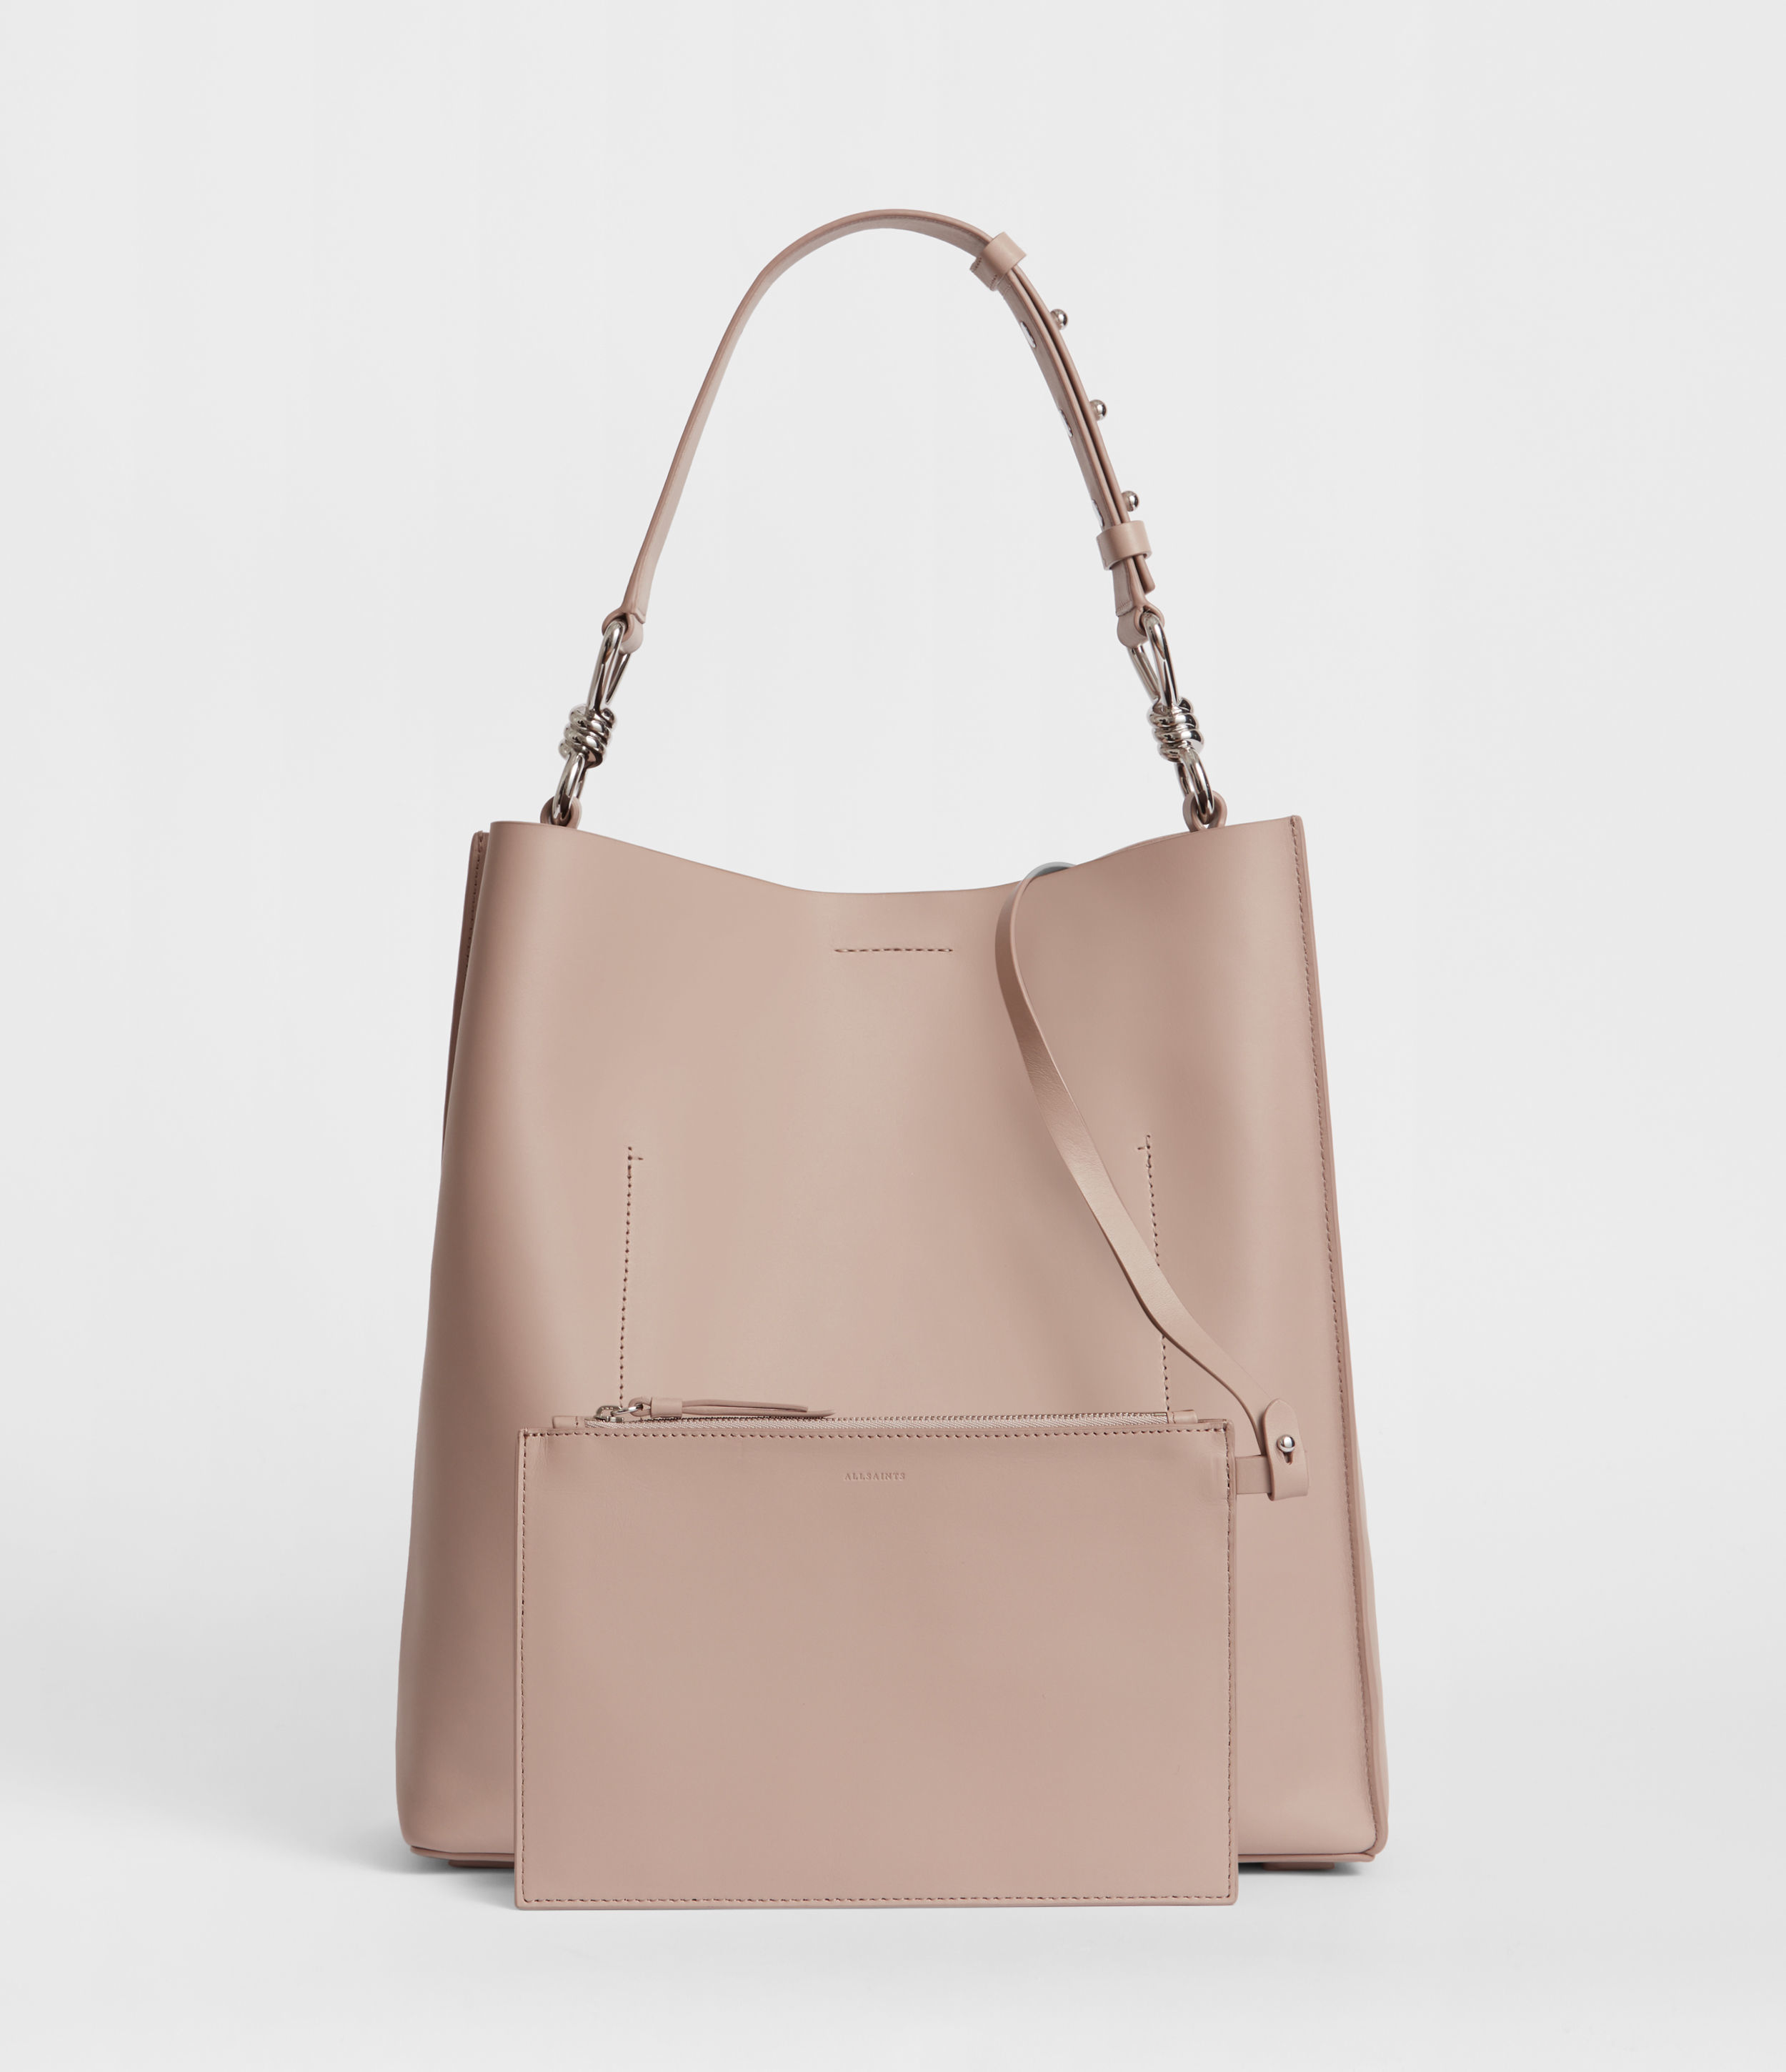 Allsaints Captain Leather North South Tote Bag In Sand Beige